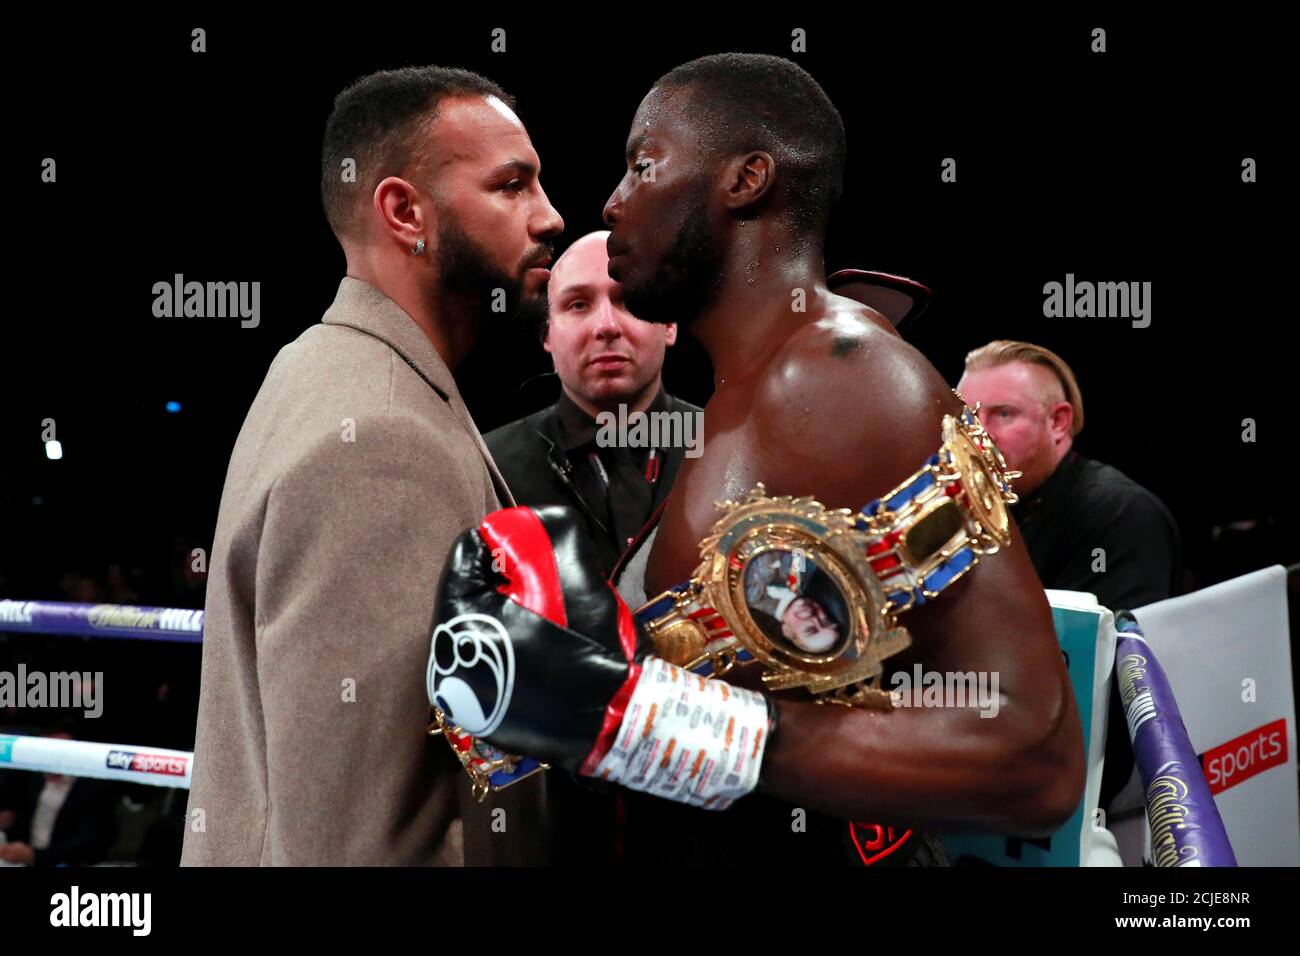 Boxing - Lawrence Okolie v Tamas Lodi - WBA Continental Cruiserweight Title  - The O2 Arena, London, Britain - February 2, 2019 Lawrence Okolie goes  head-to-head with his next opponent Wadi Camacho